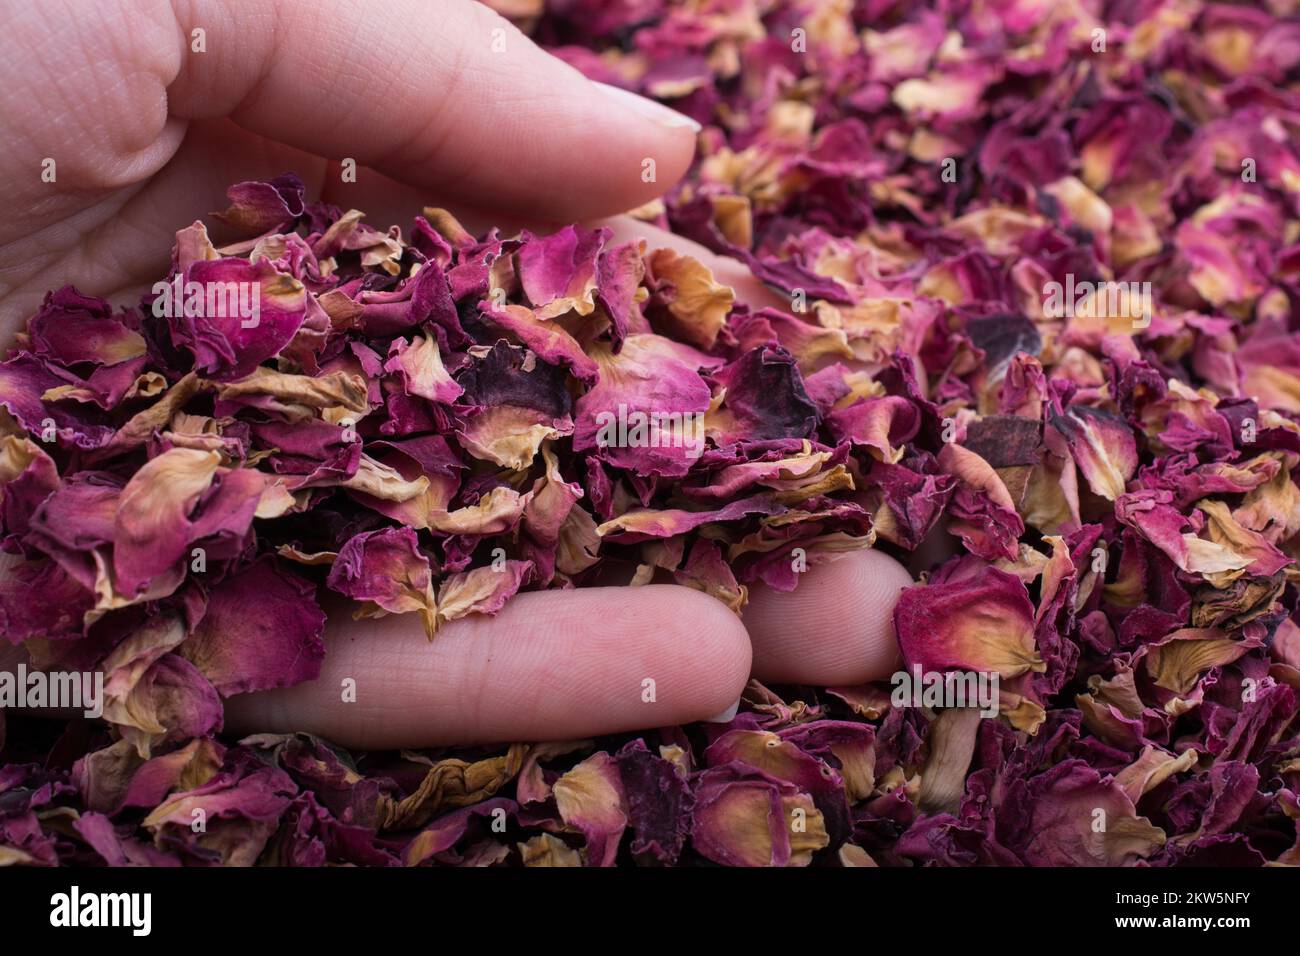 Dried rose petals in the bowl Stock Photo - Alamy